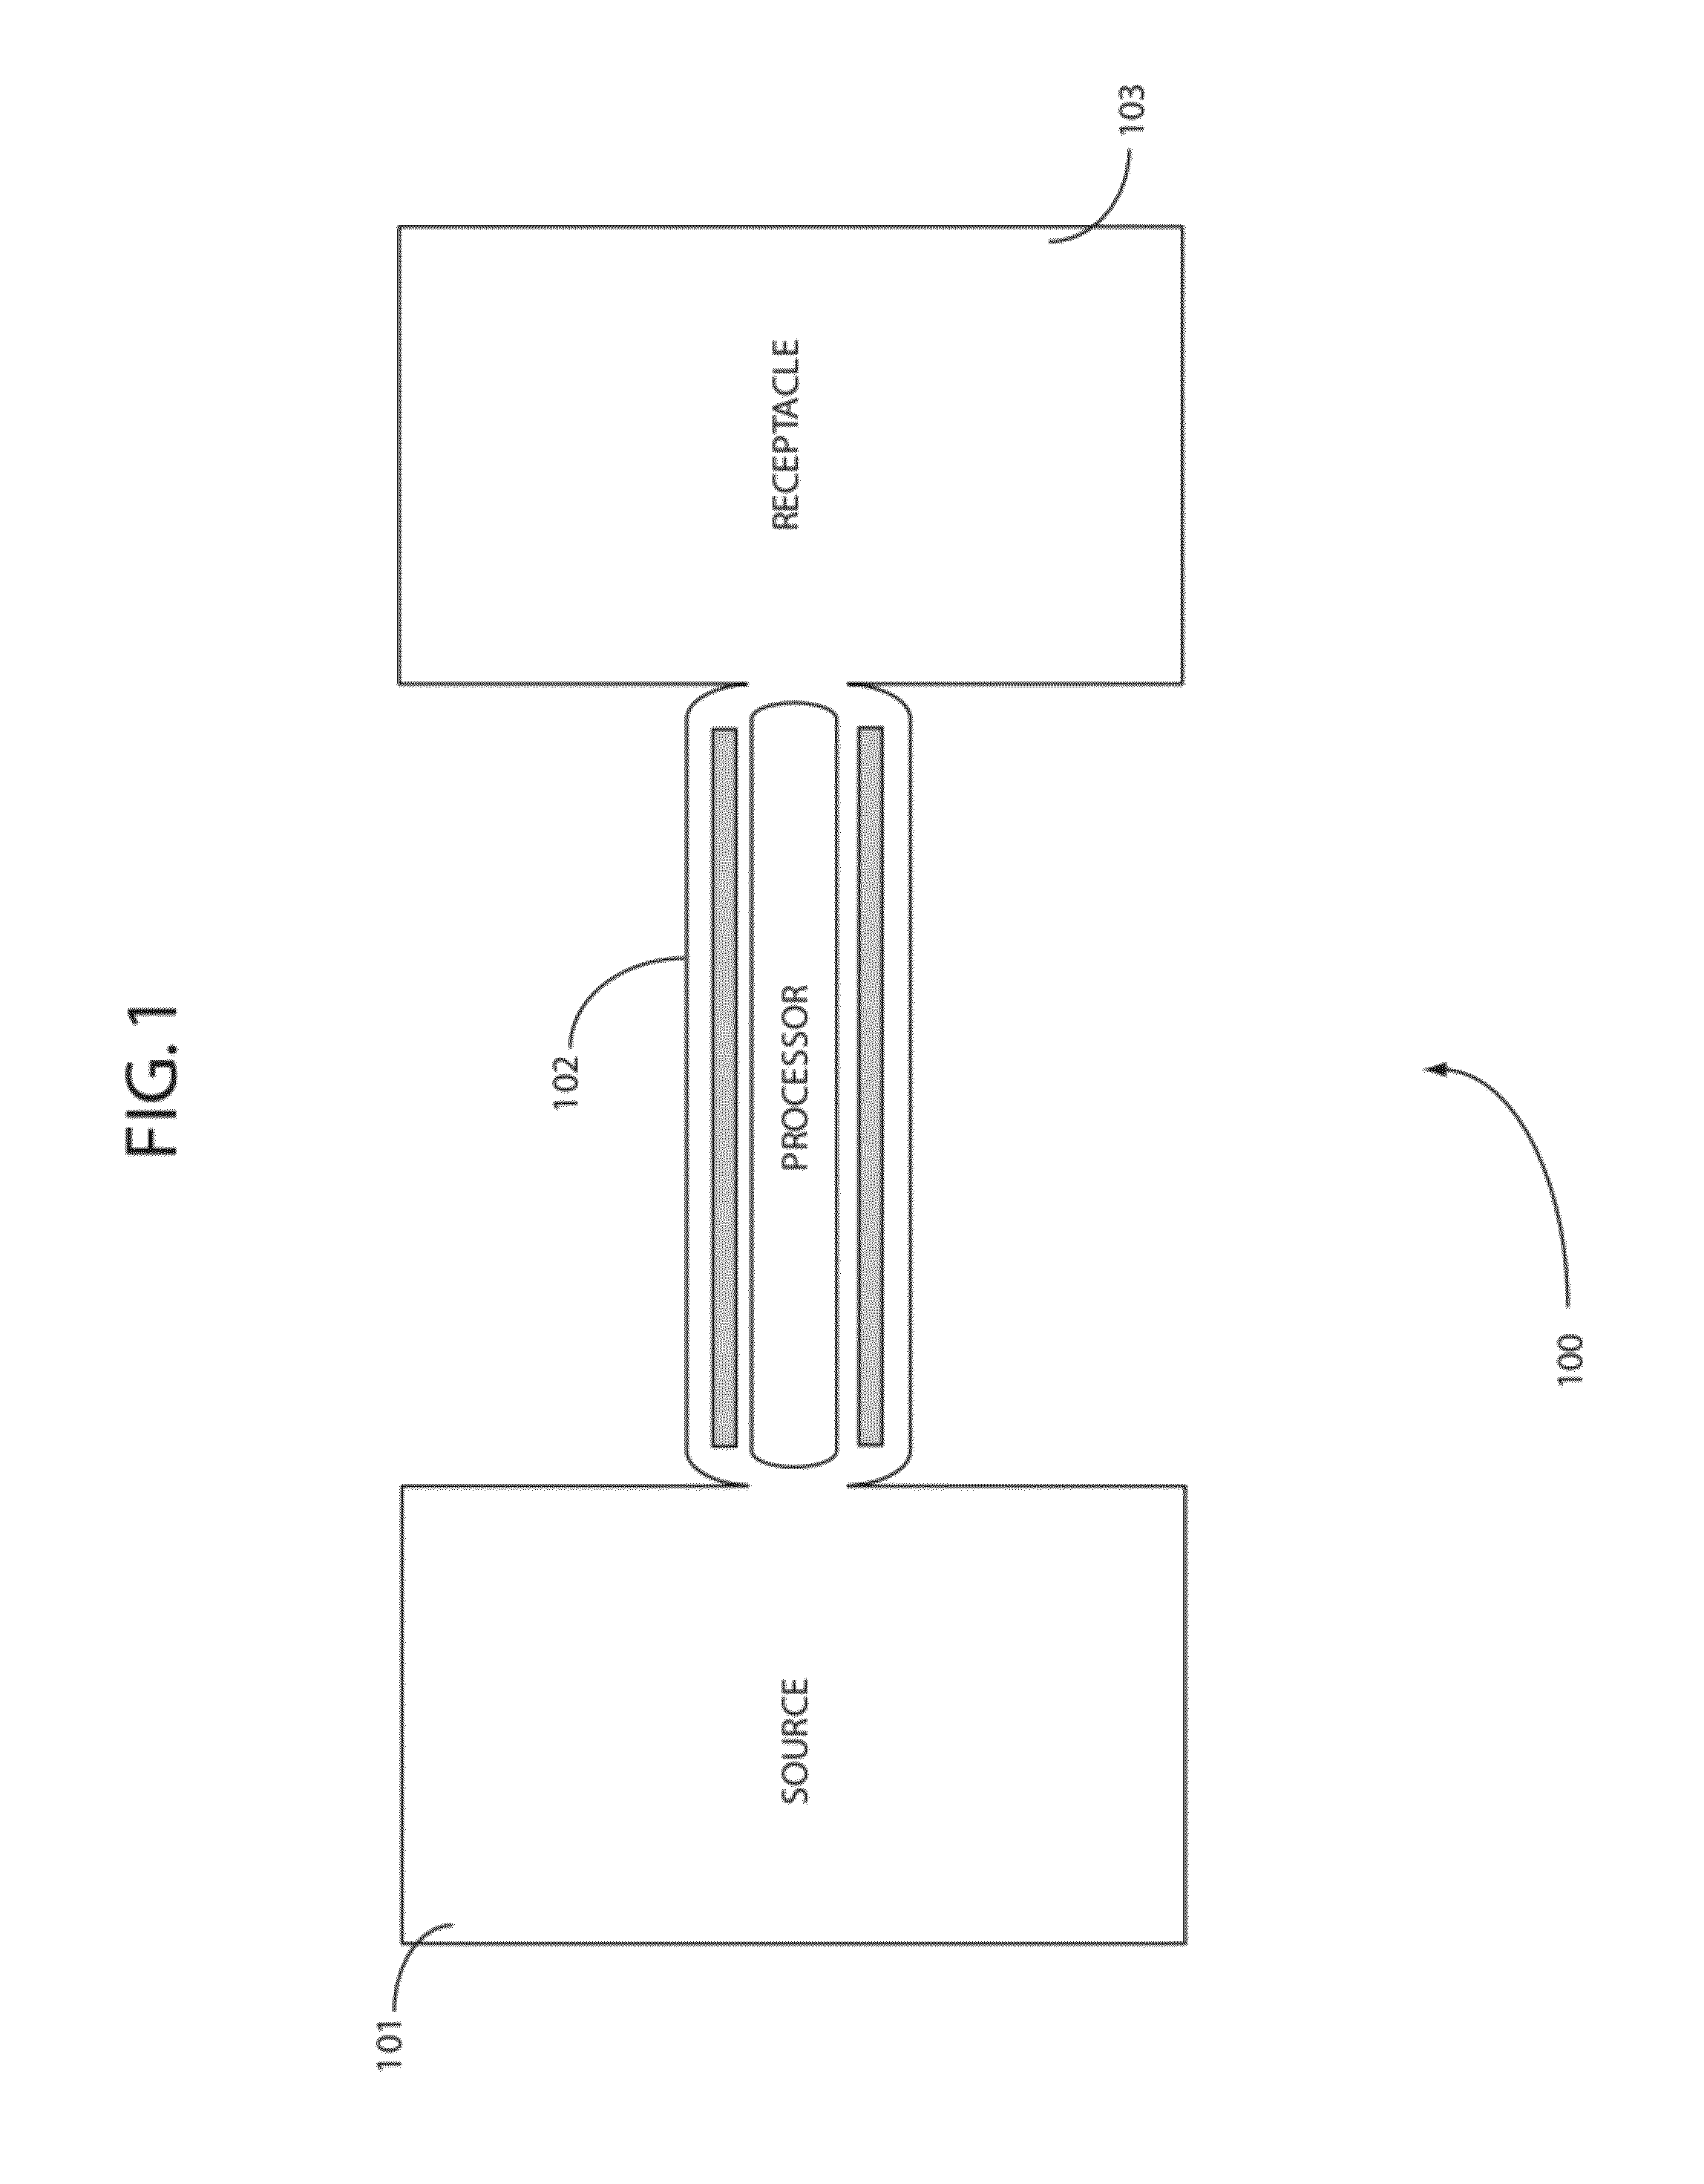 System for conditioning fluids utilizing a magnetic fluid processor